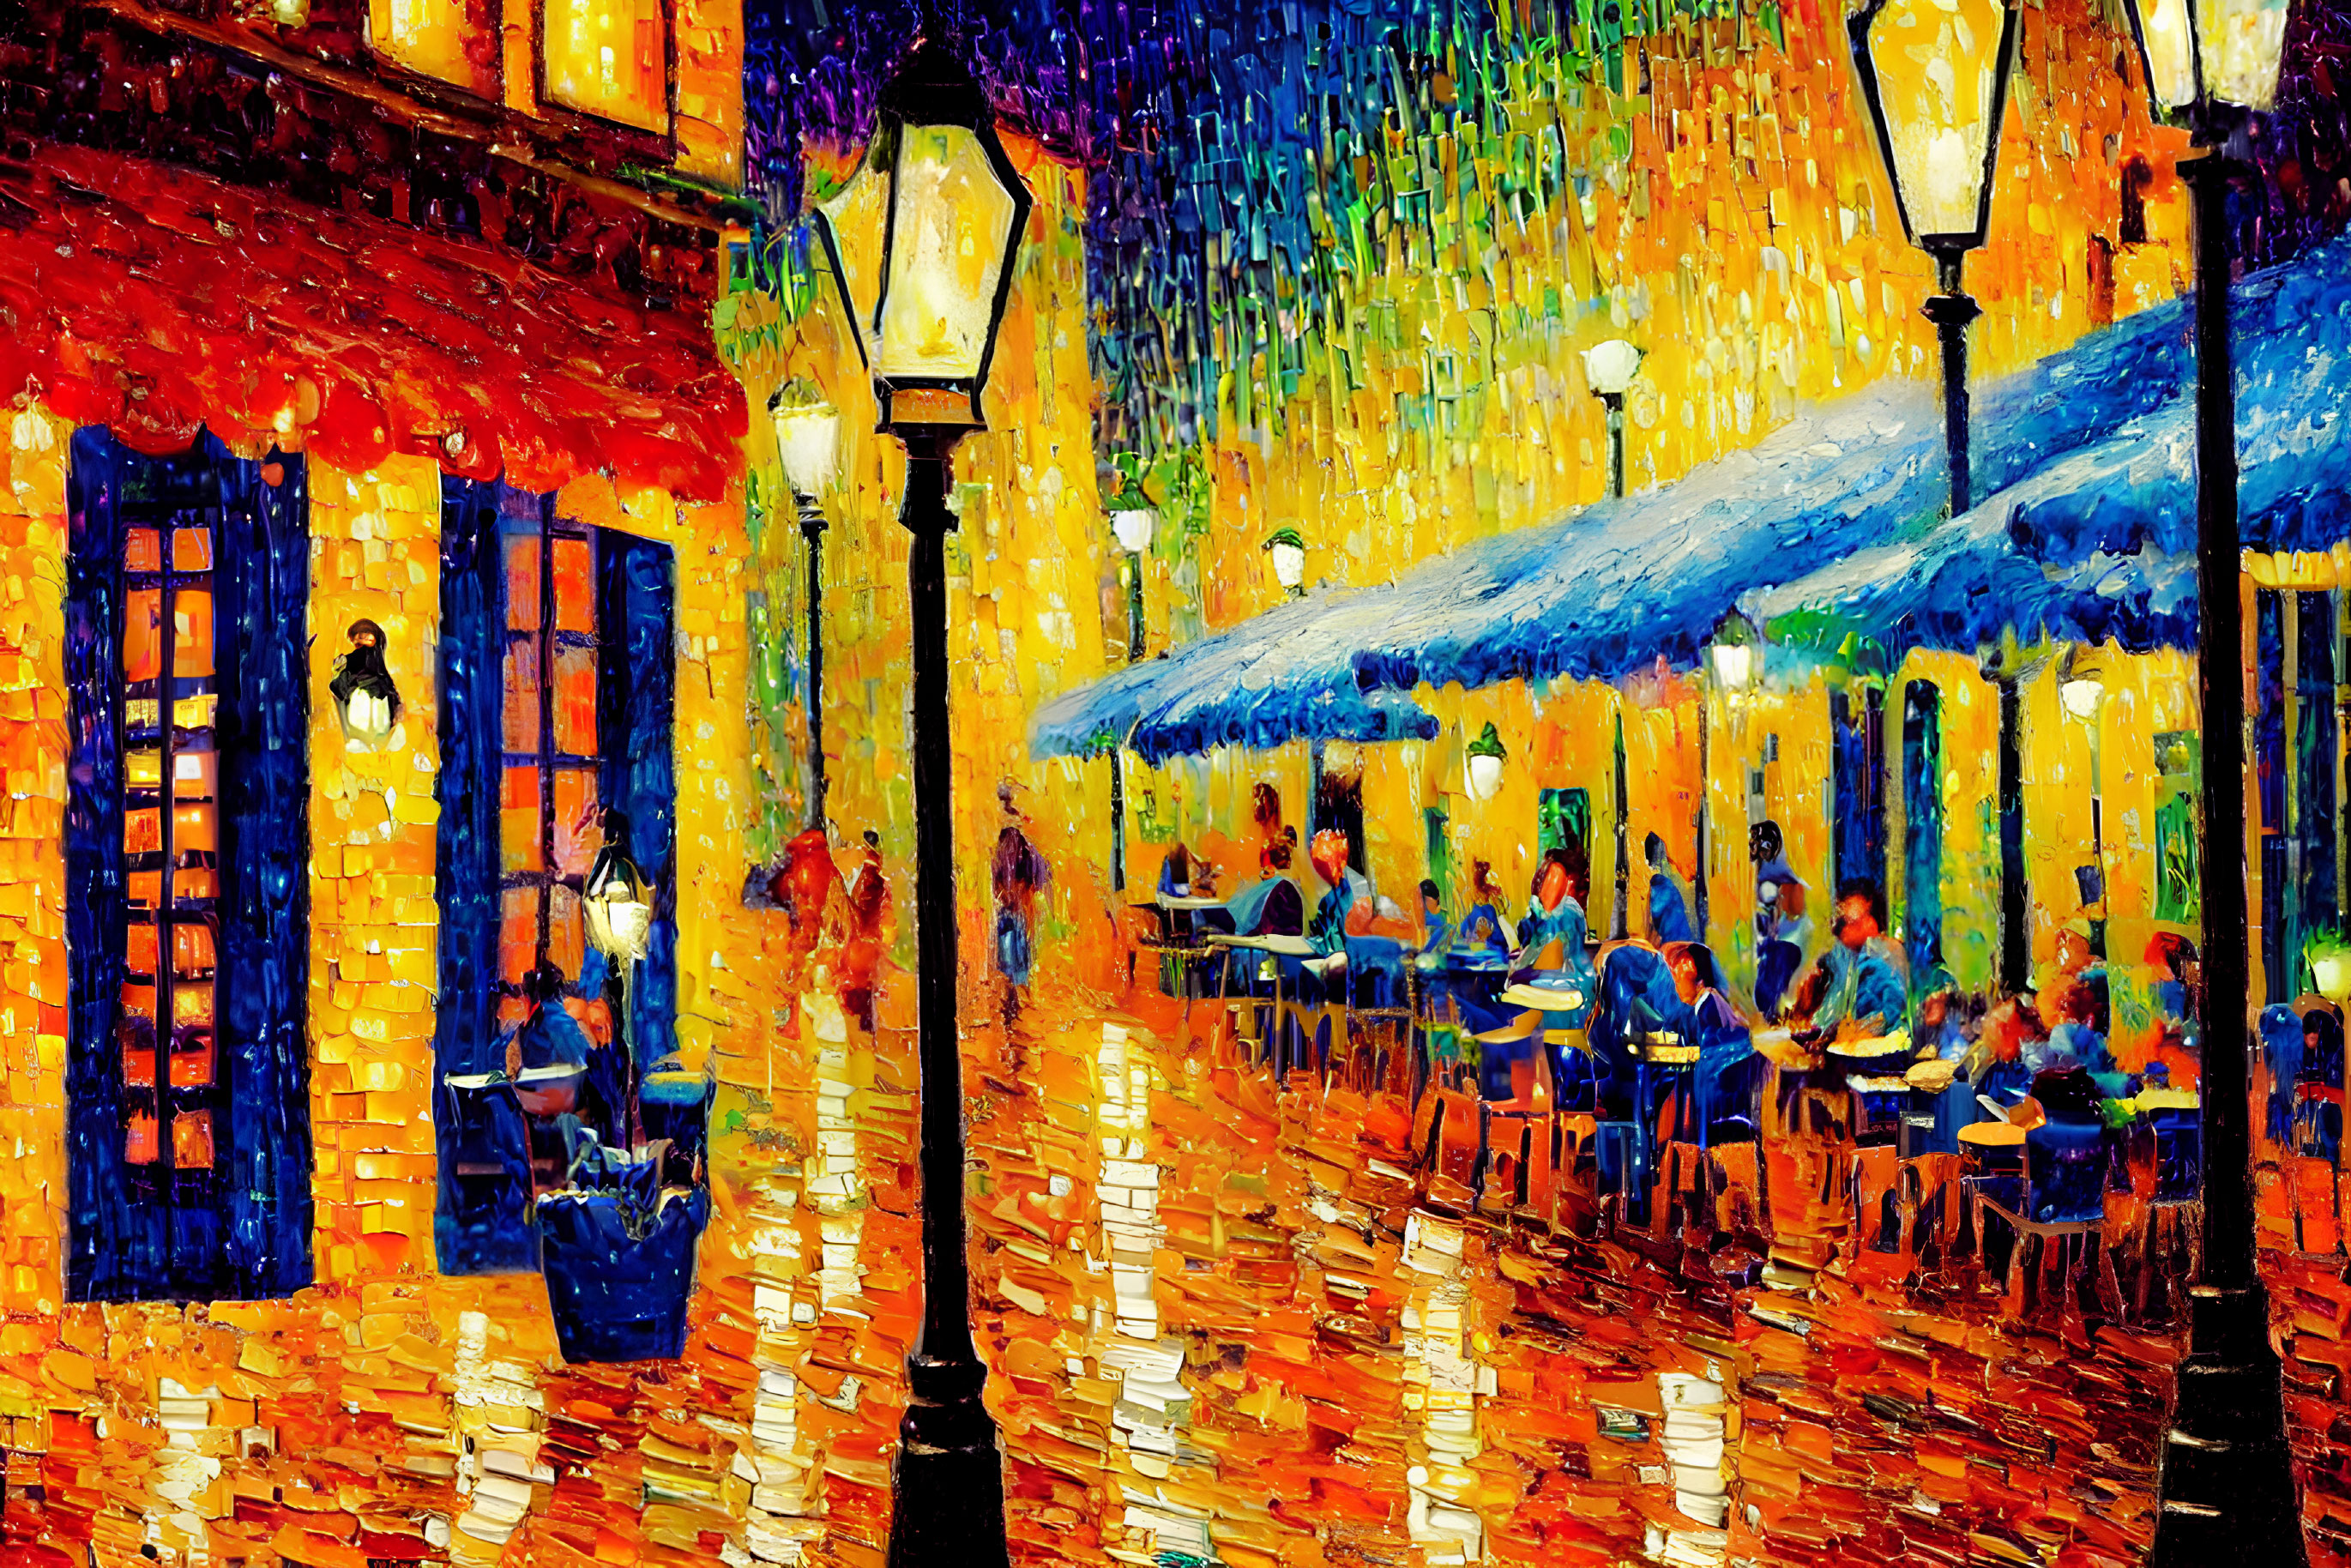 Impressionistic painting of a vibrant night street scene